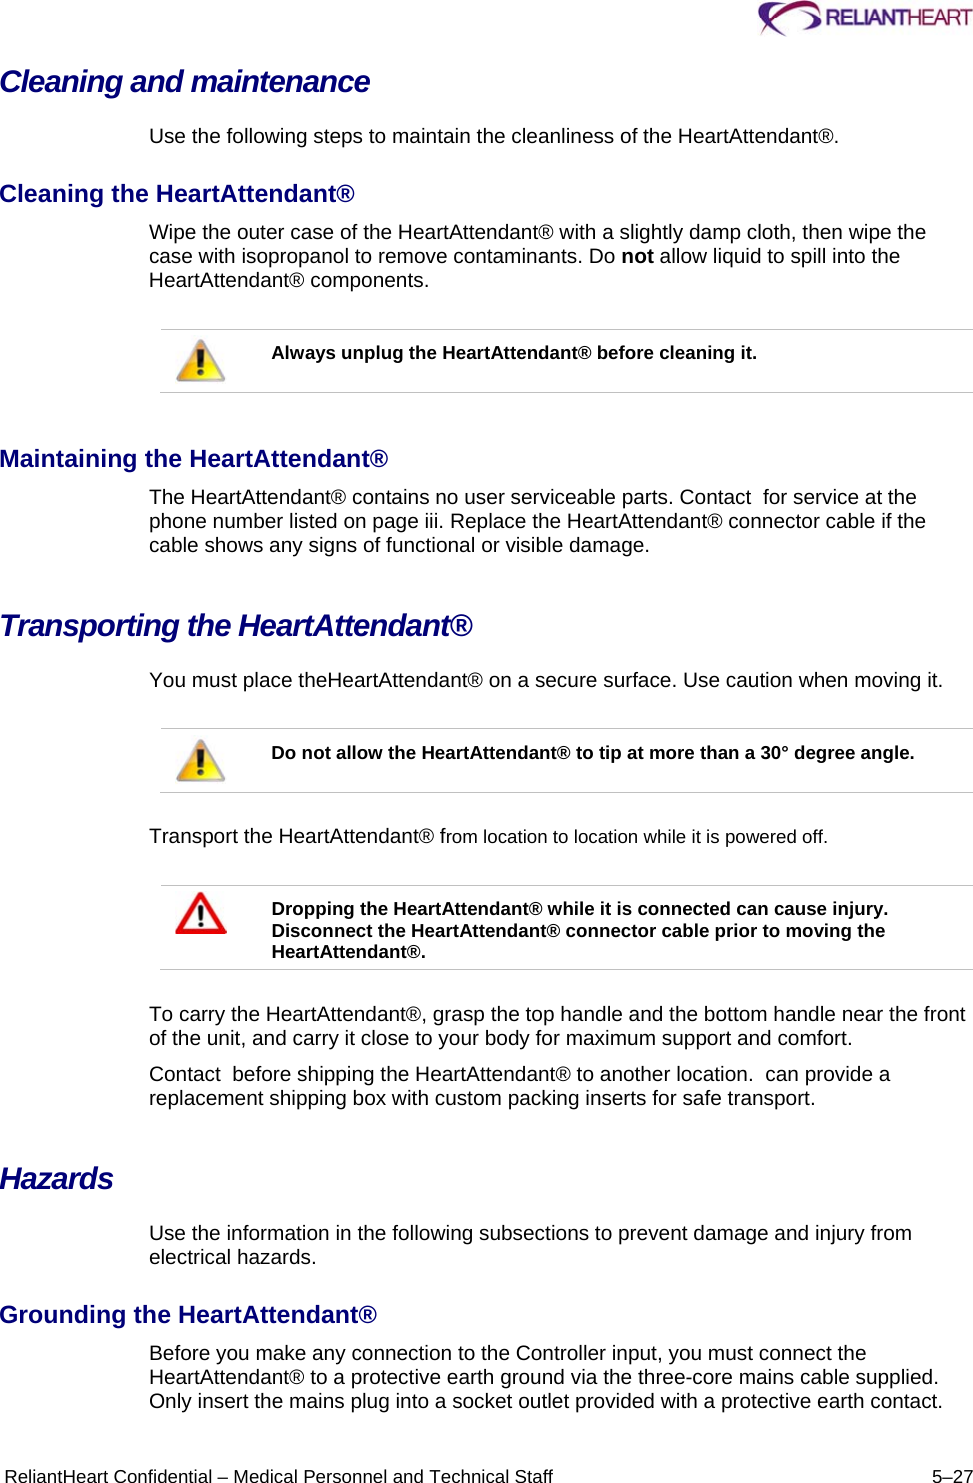      ReliantHeart Confidential – Medical Personnel and Technical Staff  5–27 Cleaning and maintenance  Use the following steps to maintain the cleanliness of the HeartAttendant®.  Cleaning the HeartAttendant®  Wipe the outer case of the HeartAttendant® with a slightly damp cloth, then wipe the case with isopropanol to remove contaminants. Do not allow liquid to spill into the HeartAttendant® components.    Always unplug the HeartAttendant® before cleaning it.   Maintaining the HeartAttendant®  The HeartAttendant® contains no user serviceable parts. Contact  for service at the phone number listed on page iii. Replace the HeartAttendant® connector cable if the cable shows any signs of functional or visible damage.  Transporting the HeartAttendant®  You must place theHeartAttendant® on a secure surface. Use caution when moving it.    Do not allow the HeartAttendant® to tip at more than a 30° degree angle.   Transport the HeartAttendant® from location to location while it is powered off.    Dropping the HeartAttendant® while it is connected can cause injury. Disconnect the HeartAttendant® connector cable prior to moving the HeartAttendant®.   To carry the HeartAttendant®, grasp the top handle and the bottom handle near the front of the unit, and carry it close to your body for maximum support and comfort.  Contact  before shipping the HeartAttendant® to another location.  can provide a replacement shipping box with custom packing inserts for safe transport.  Hazards  Use the information in the following subsections to prevent damage and injury from electrical hazards.  Grounding the HeartAttendant®  Before you make any connection to the Controller input, you must connect the HeartAttendant® to a protective earth ground via the three-core mains cable supplied. Only insert the mains plug into a socket outlet provided with a protective earth contact.  